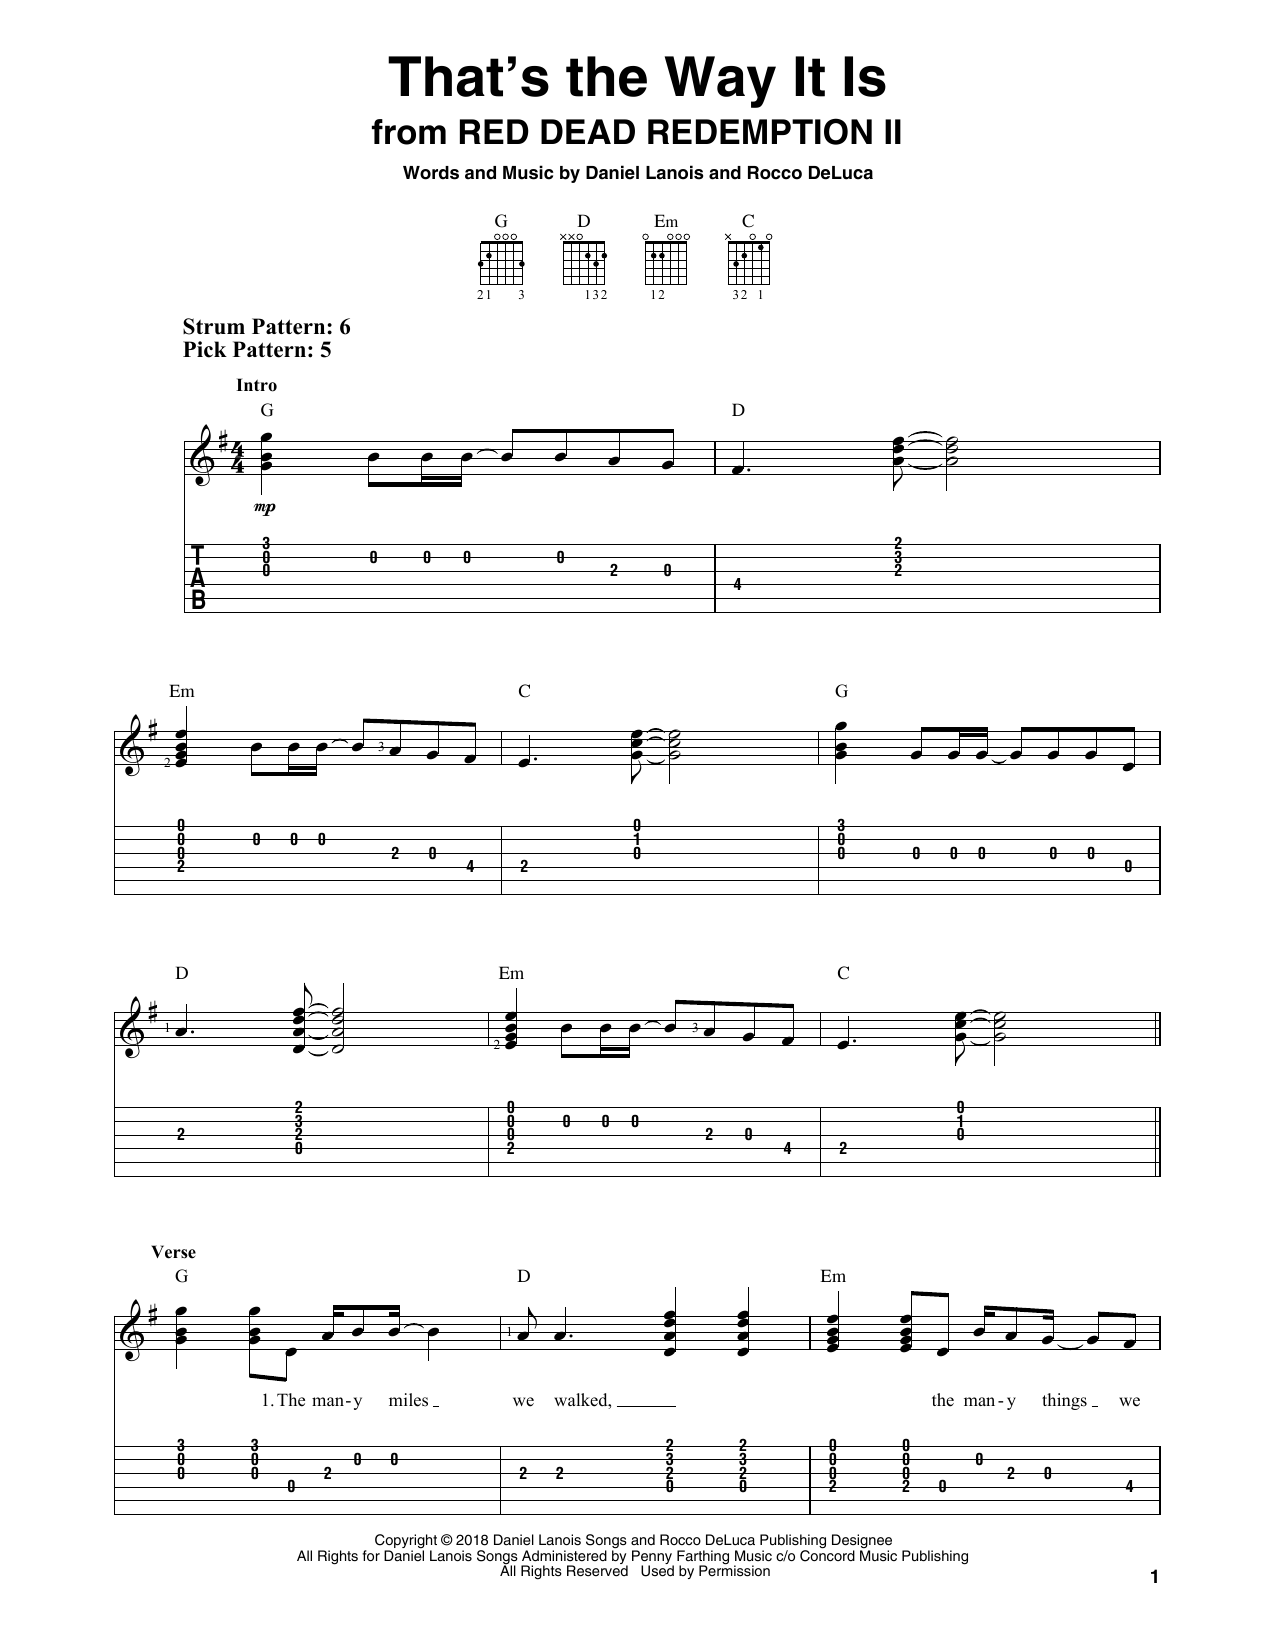 Download Daniel Lanois and Rocco DeLuca That's The Way It Is (from Red Dead Redemption II) sheet music and printable PDF score & Video Game music notes